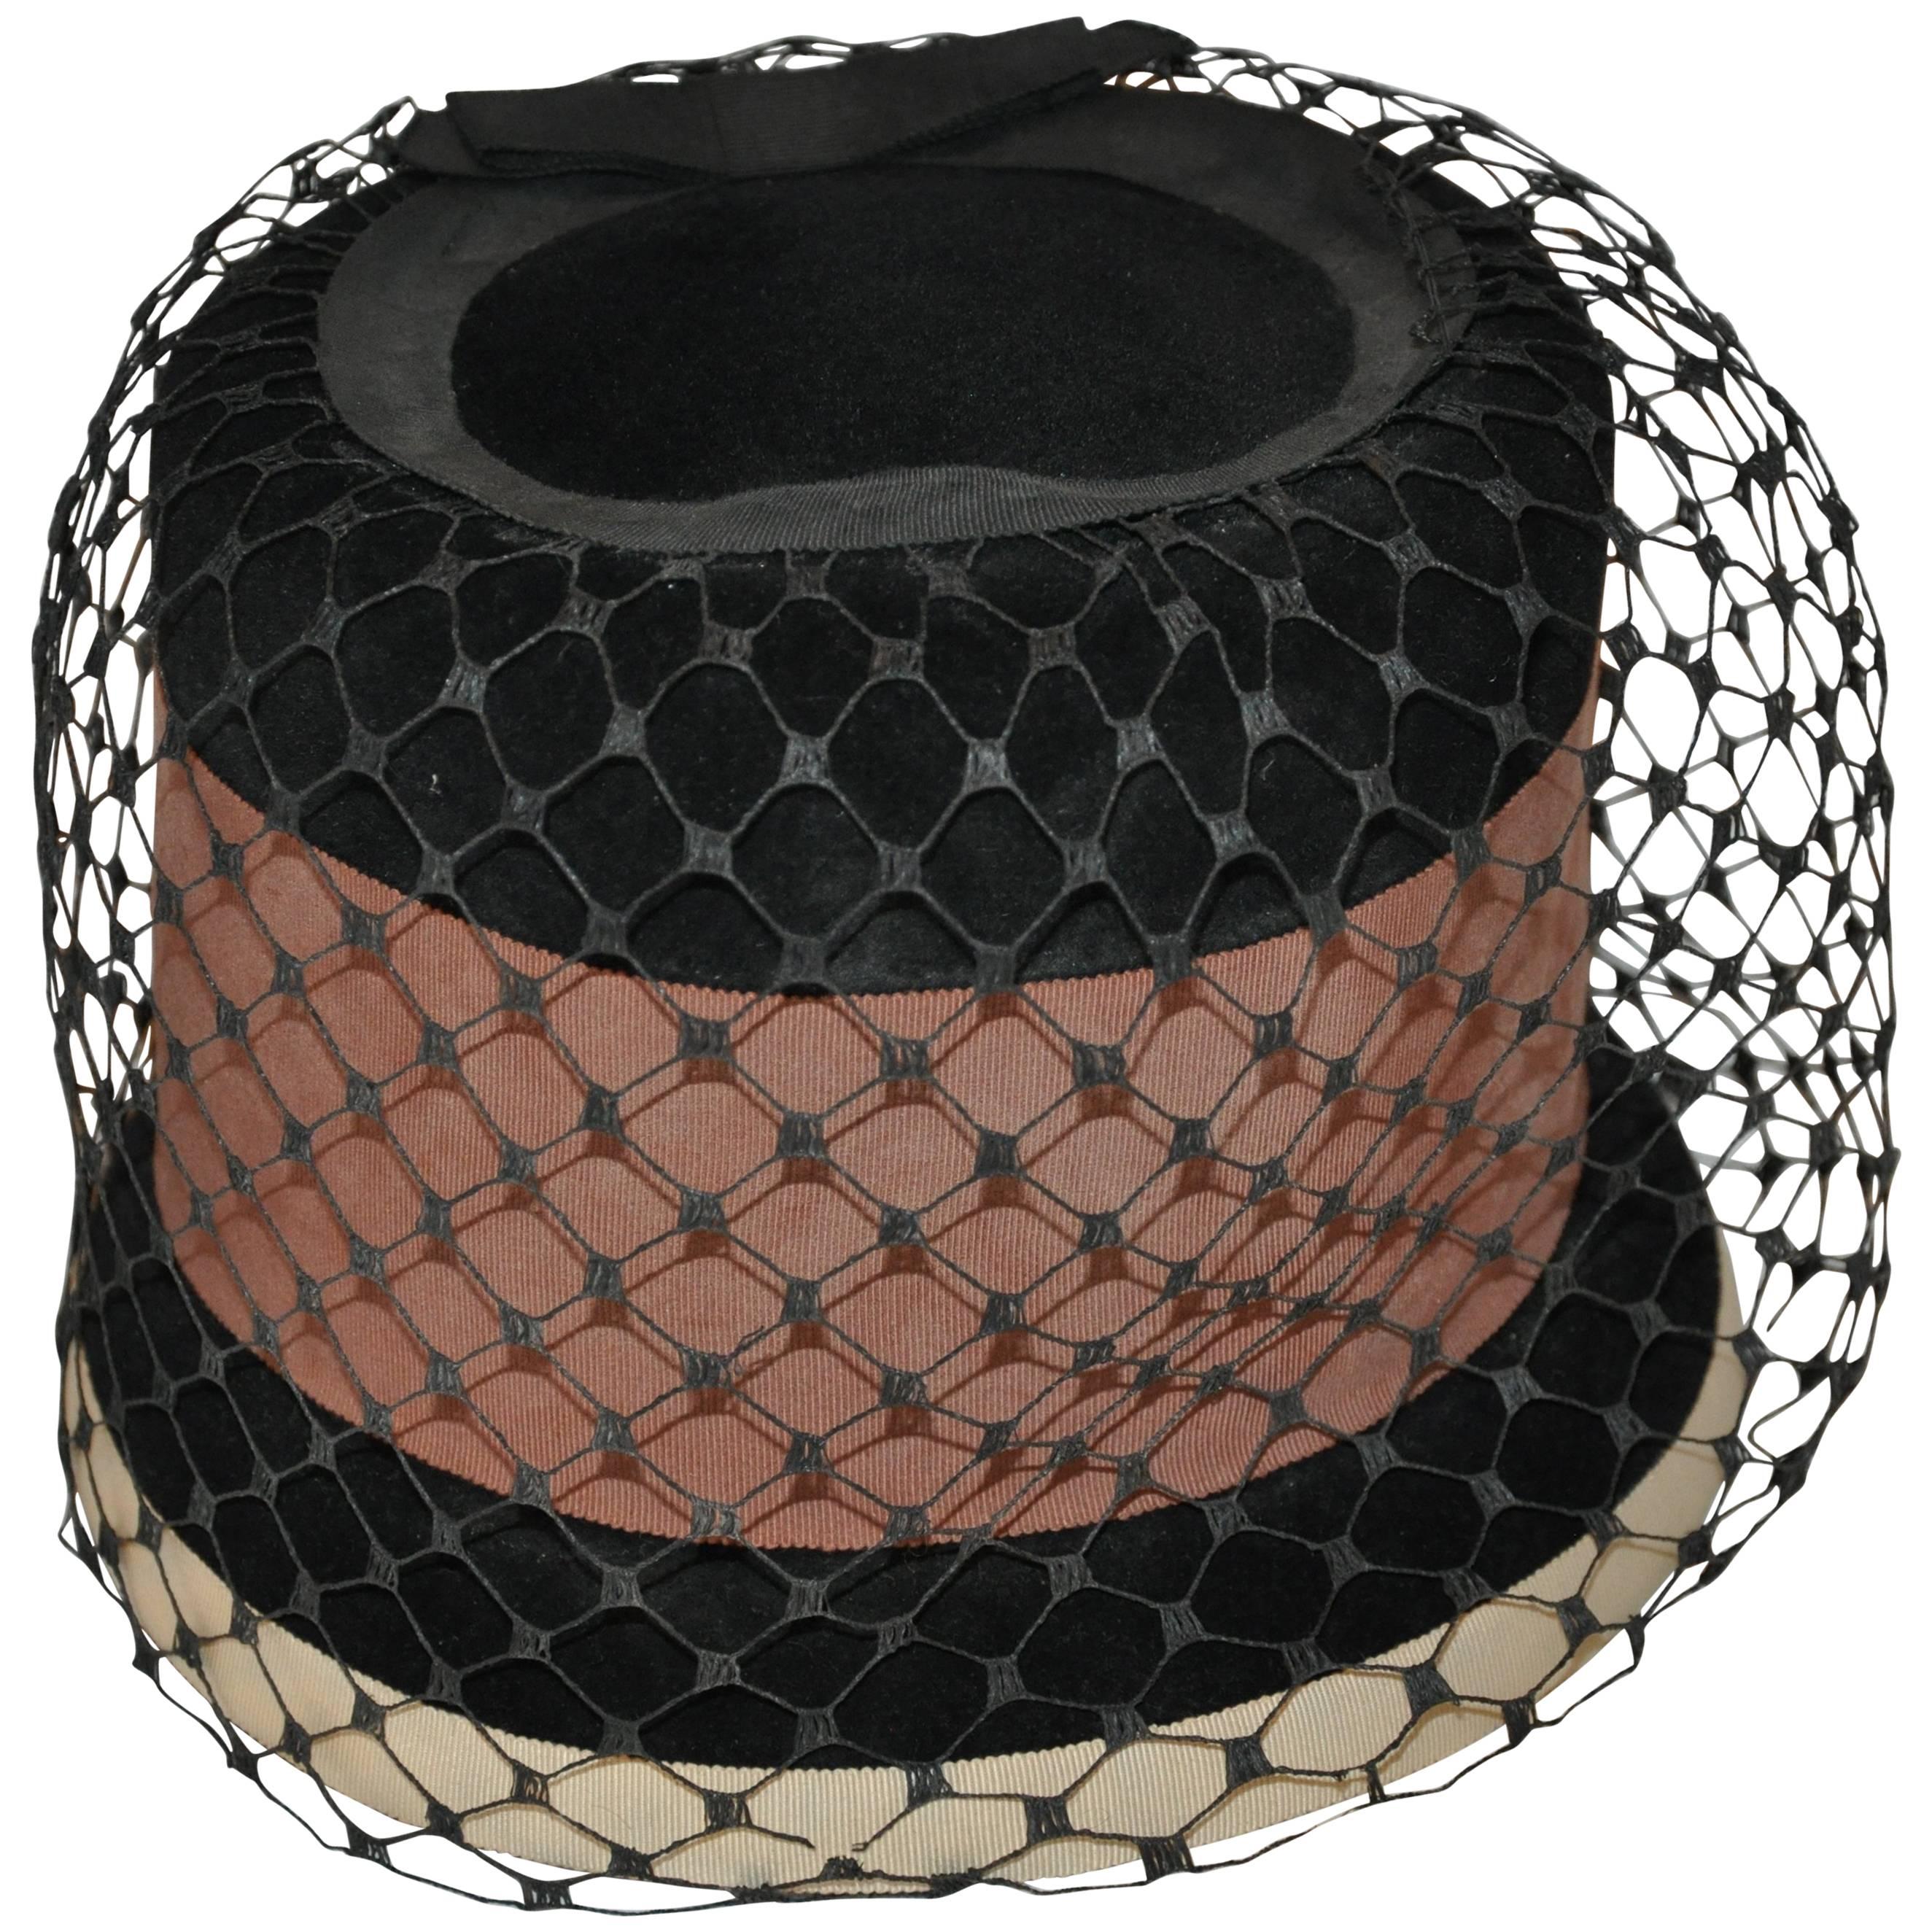 Tall Black Wool Felt Detailed with Brown and Beige Accent Netted Hat